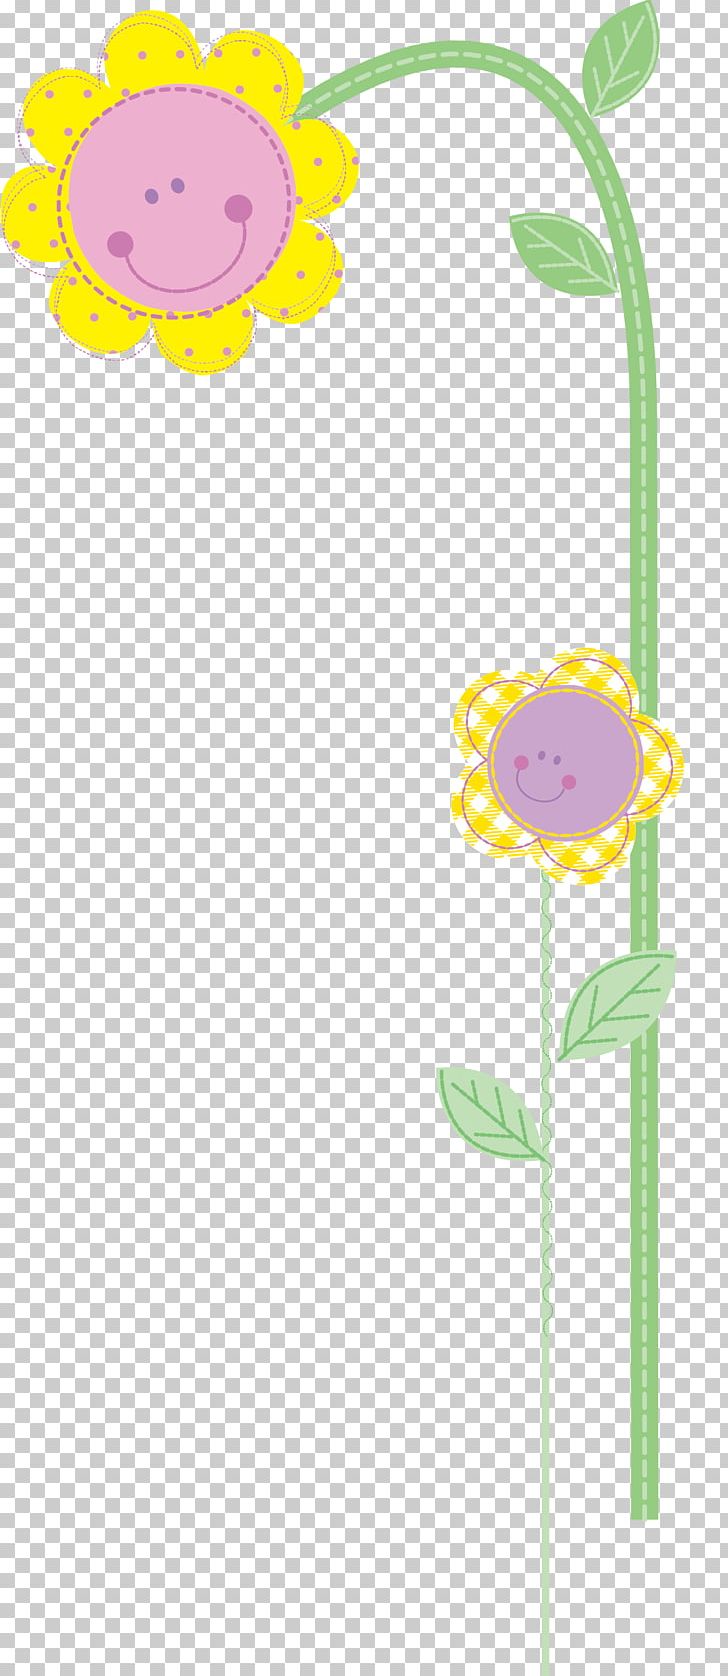 Lovely Sunflower PNG, Clipart, Angle, Cartoon, Encapsulated Postscript, Flower, Flowers Free PNG Download